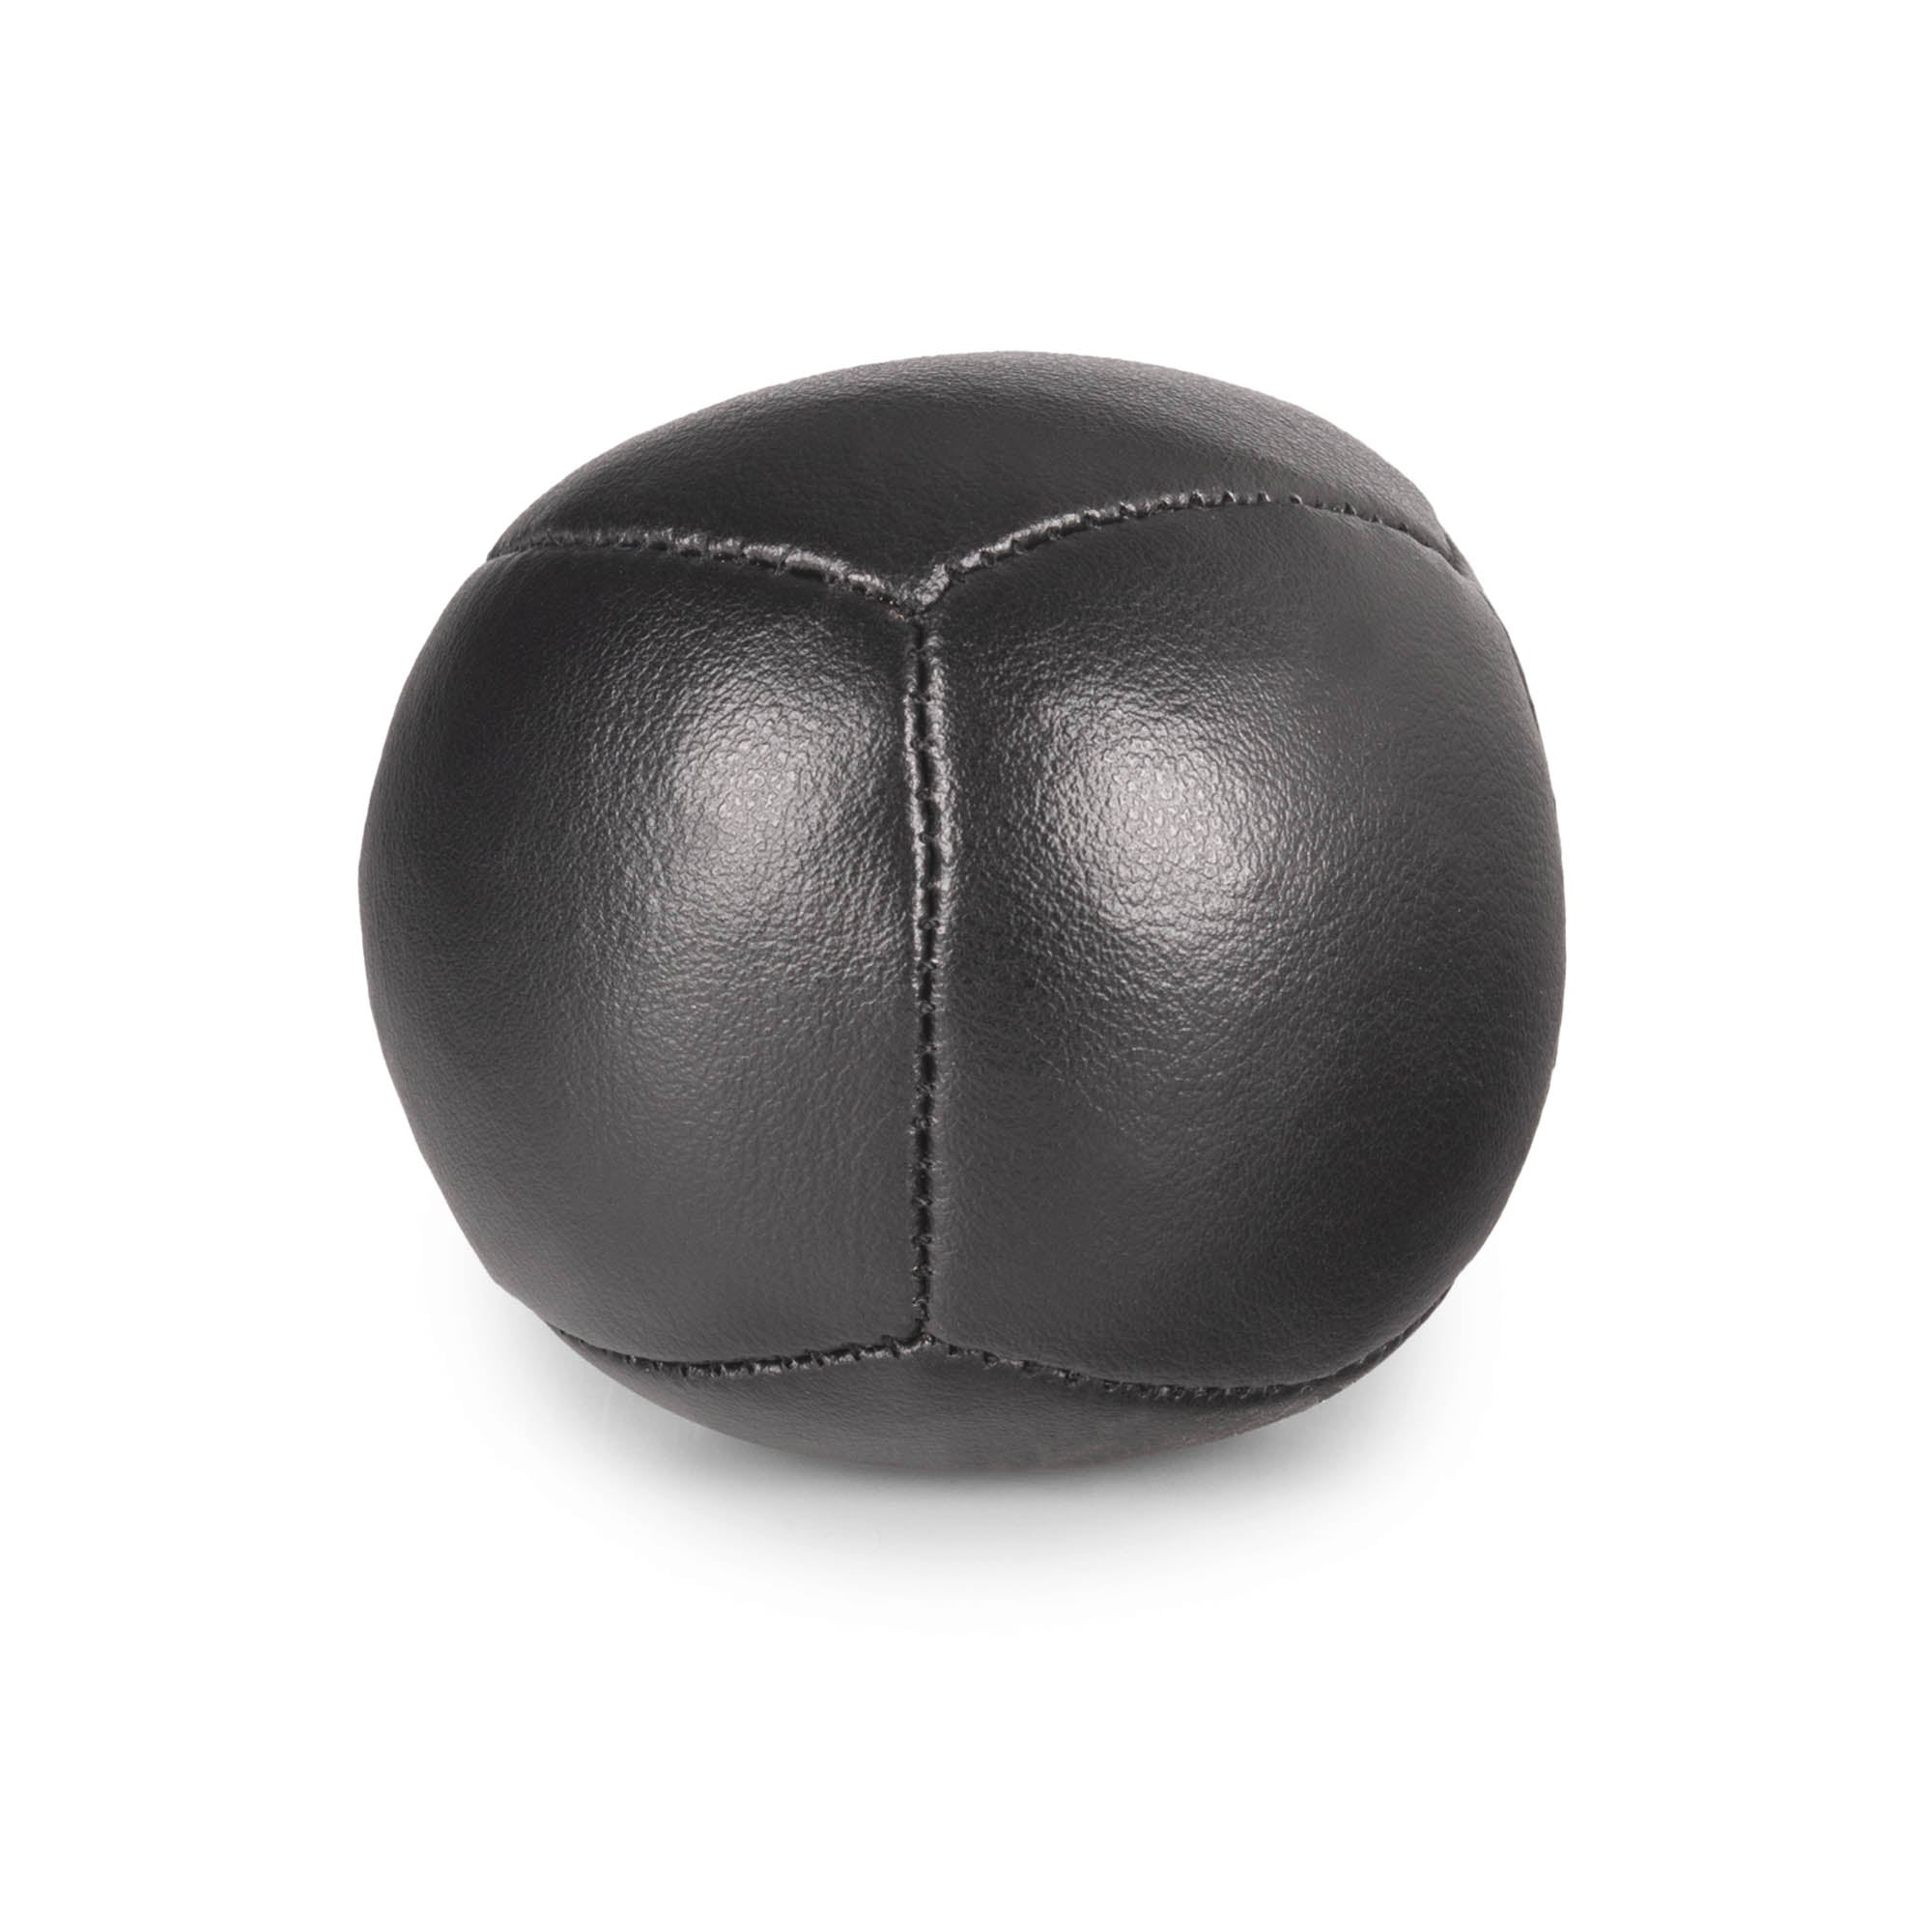 Firetoys black 110g thud juggling ball, straight on in a white background